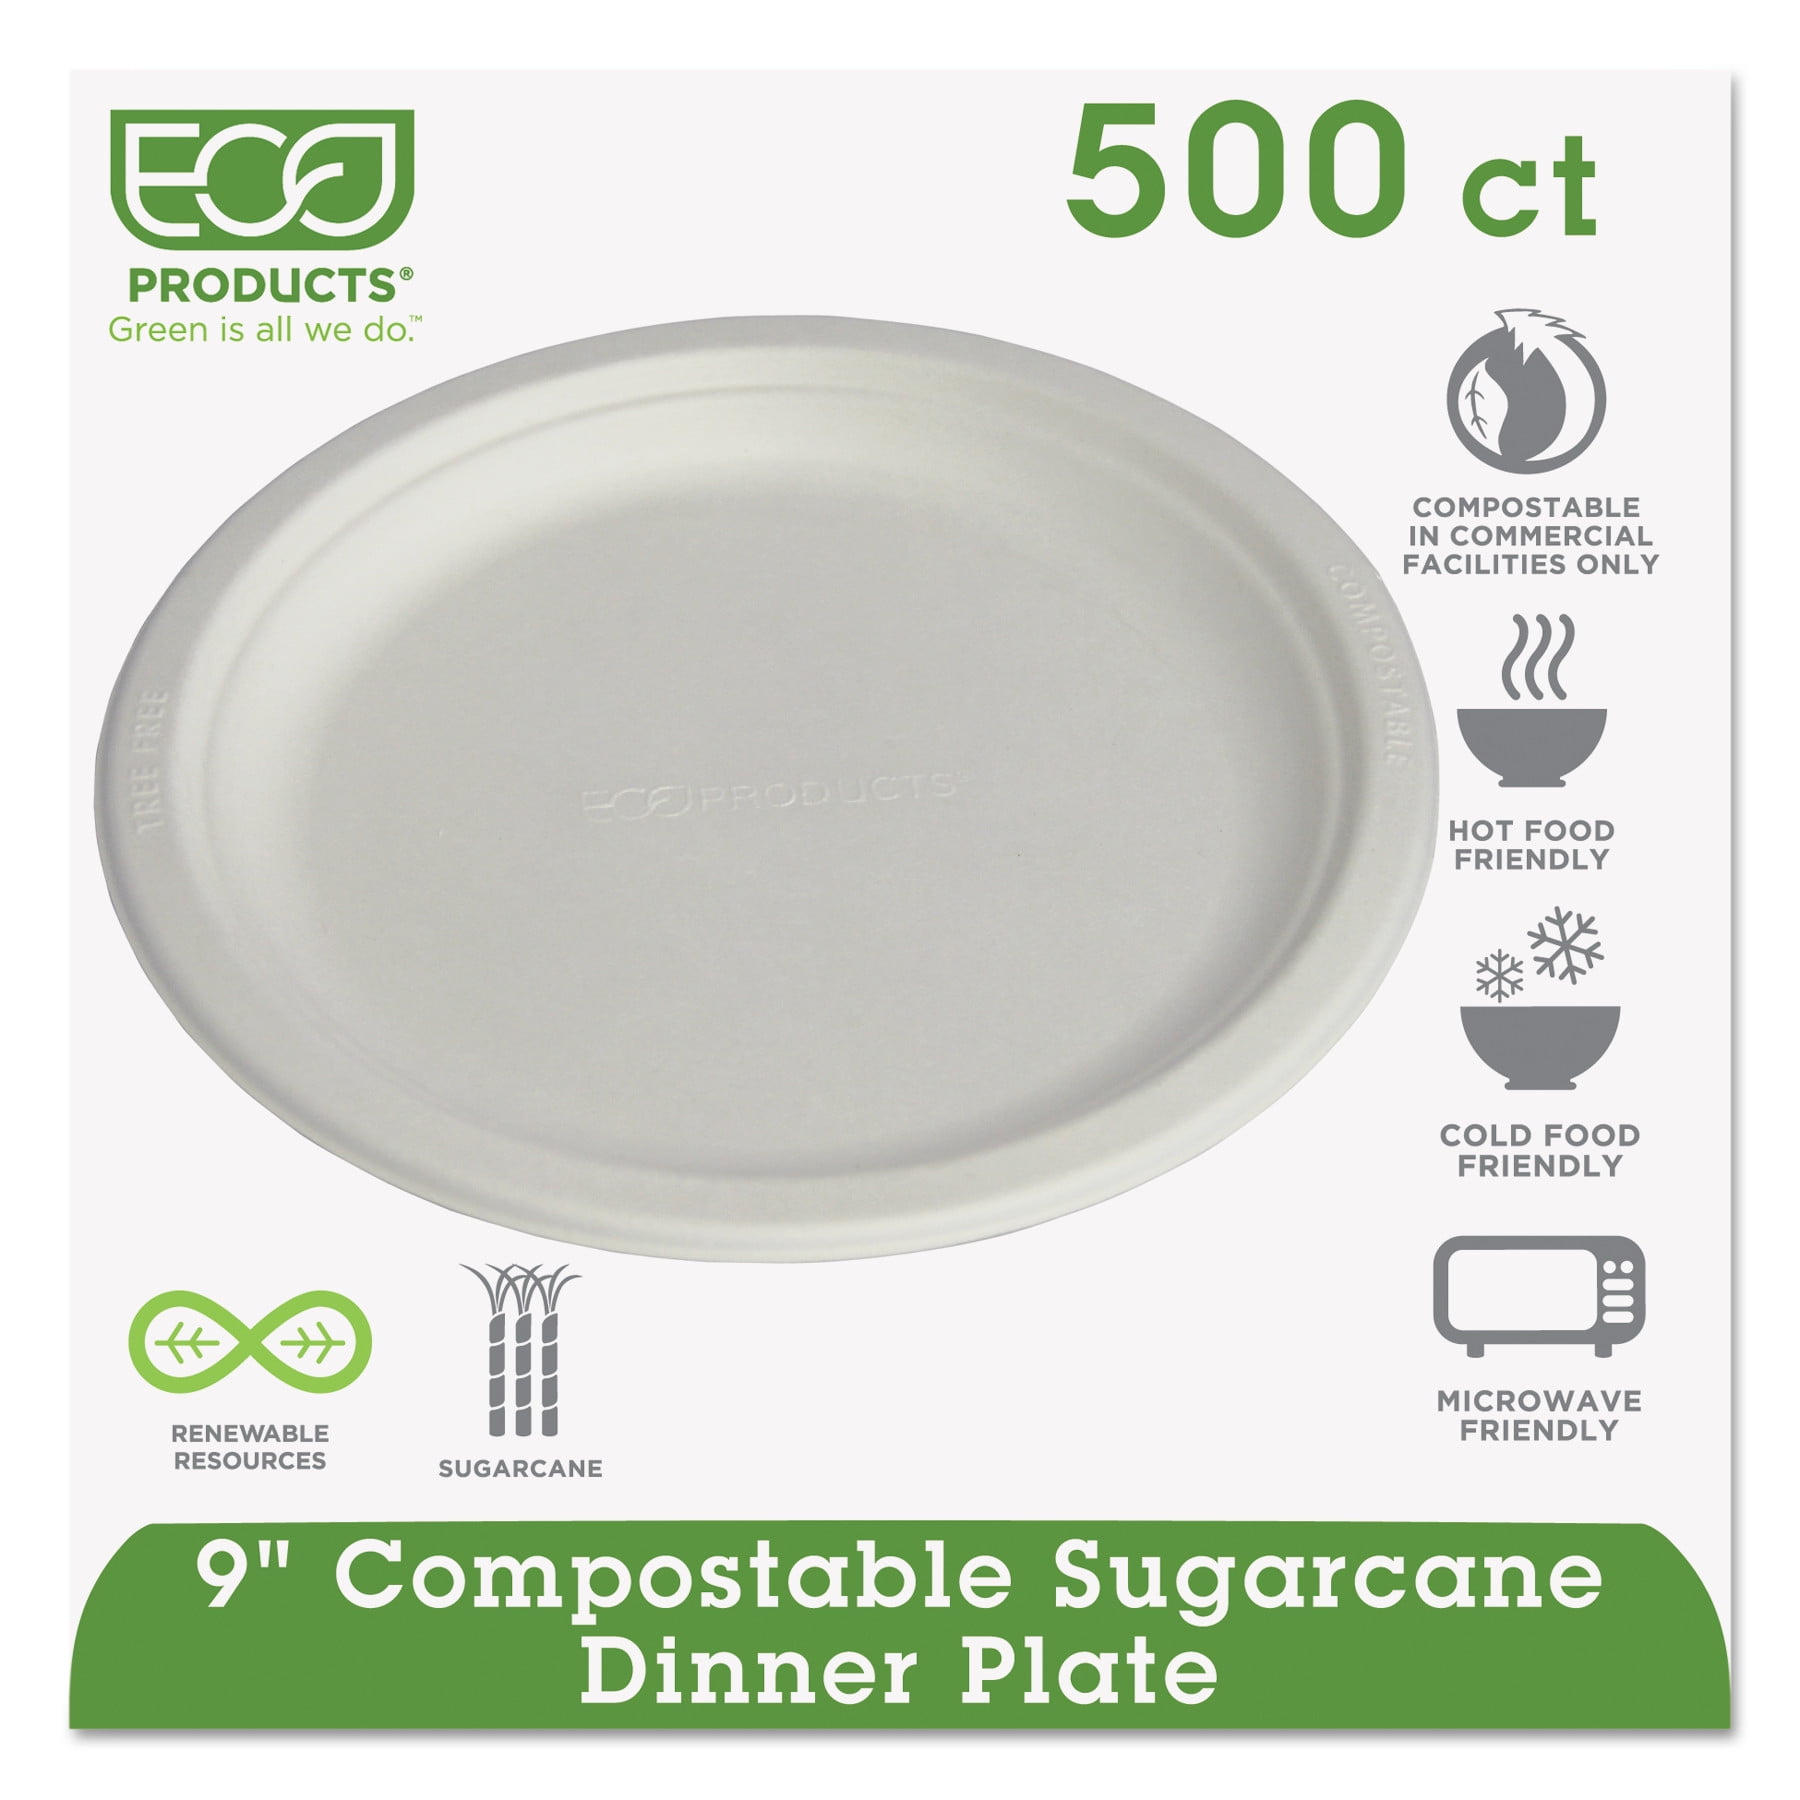 250 Menu Plates from Sugar Cane sugarcane bagasse undivided Oval 26x20 cm Paper Plates 41126 